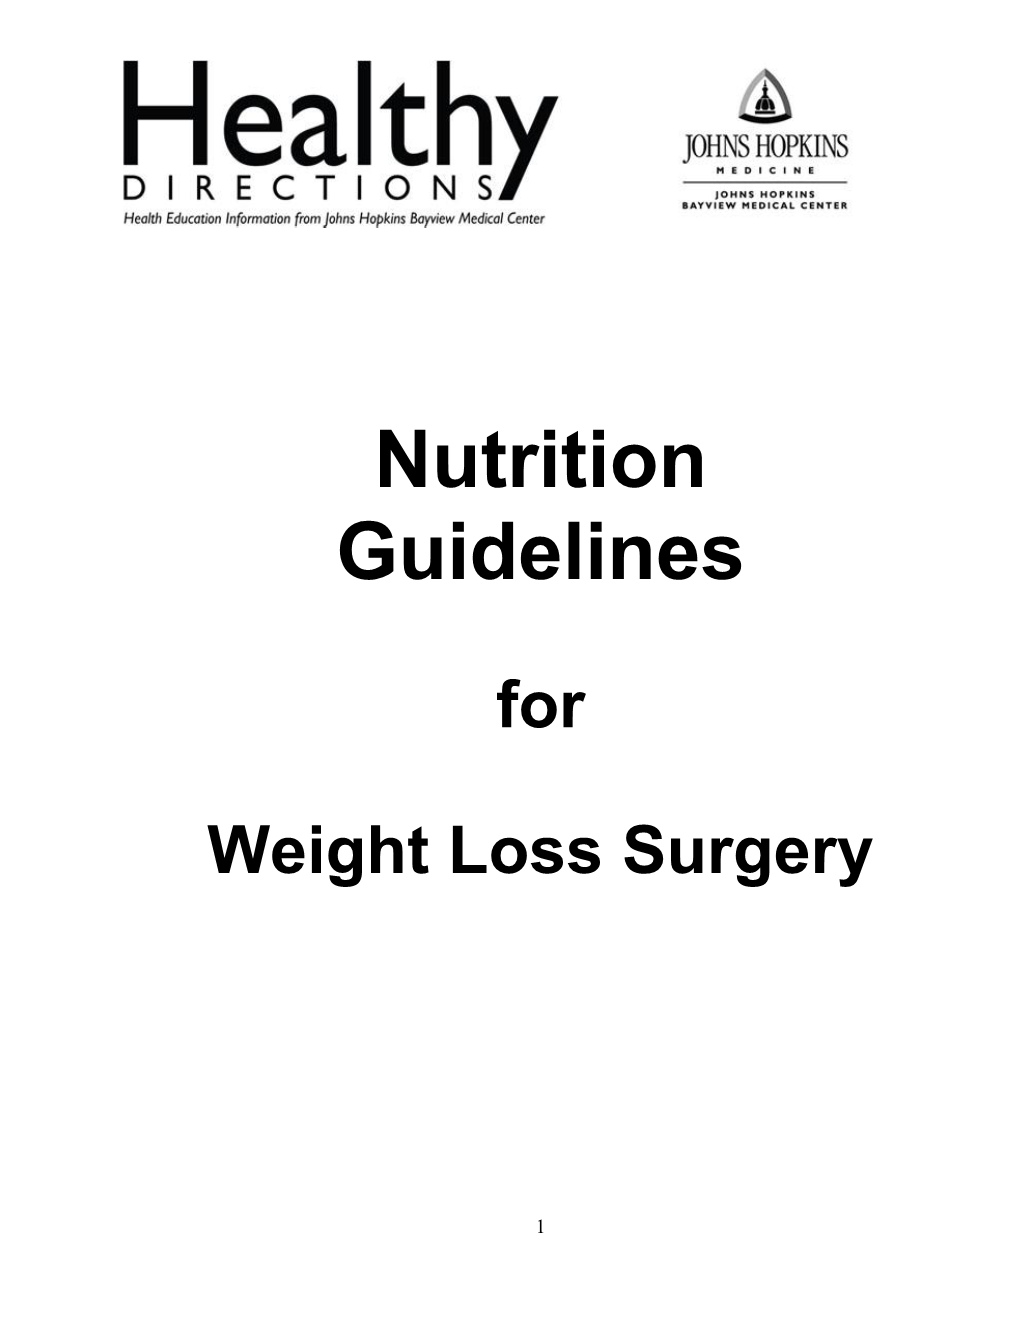 Nutrition Guidelines for Weight Loss Surgery